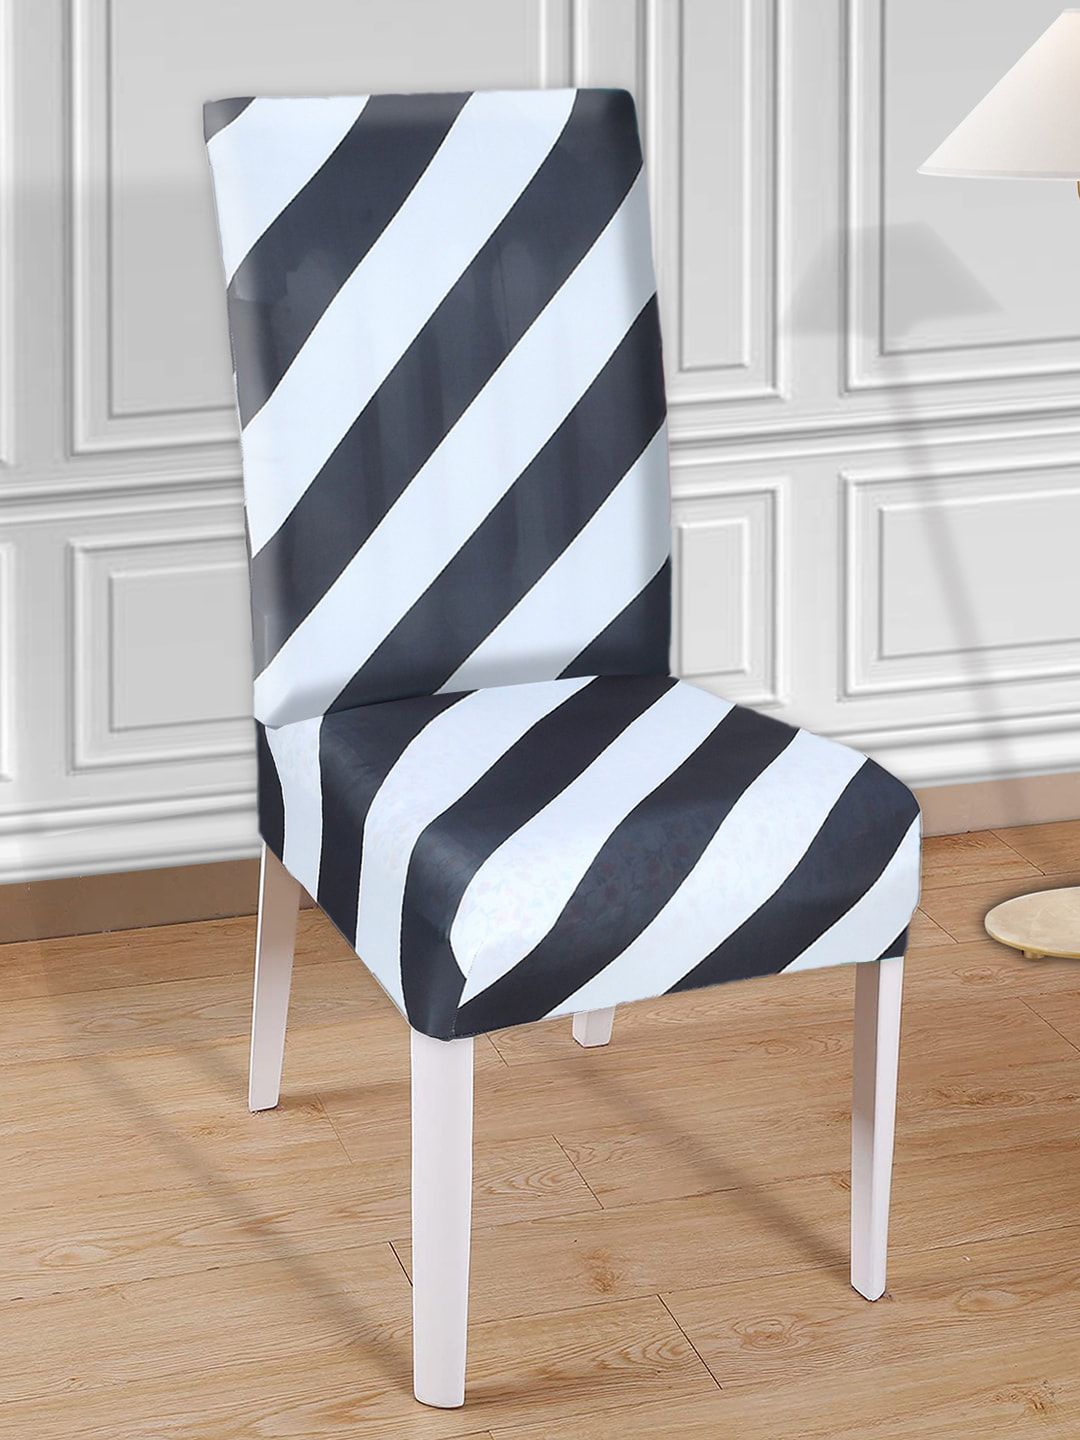 Kuber Industries Black & White Striped Chair Cover Price in India